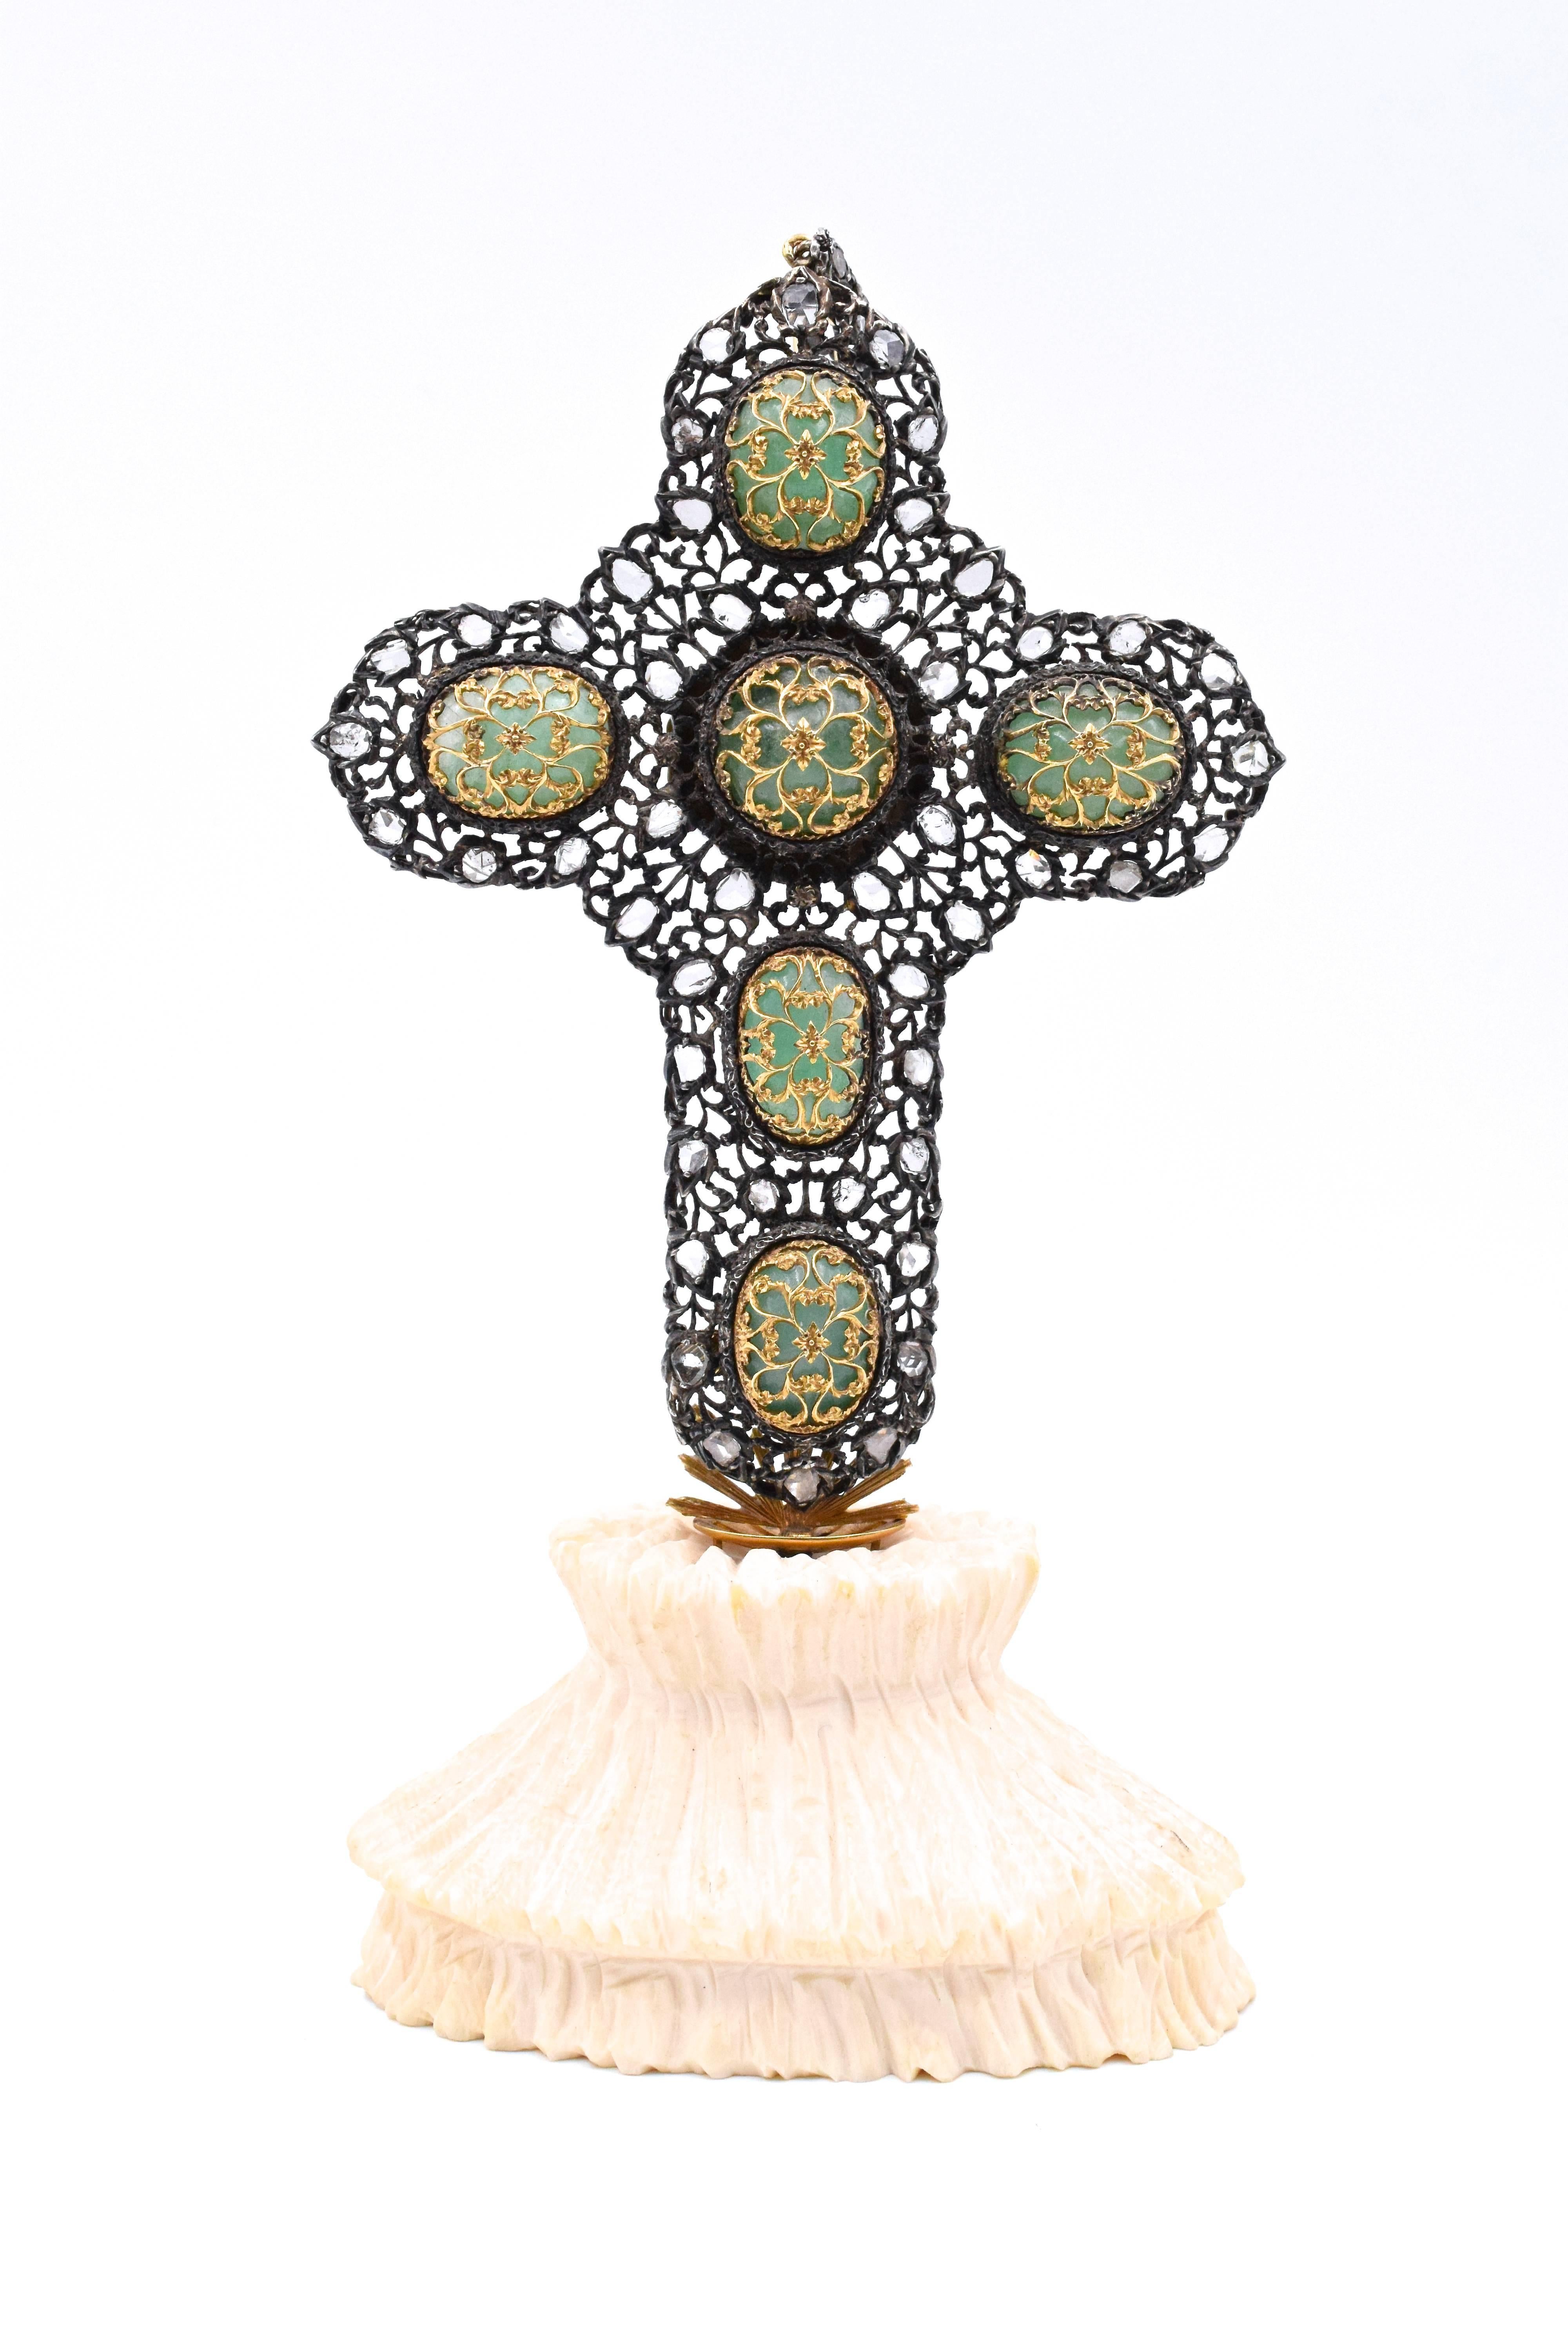 Buccellati Emerald and Diamond Cross. Vintage!
All set in 18k Yellow Gold and Silver, this cross has 6 cabochen shaped emeralds with total carat weight of approximately 50cts and 51 Rose Cut diamonds with a total carat weight of approximately 4.08